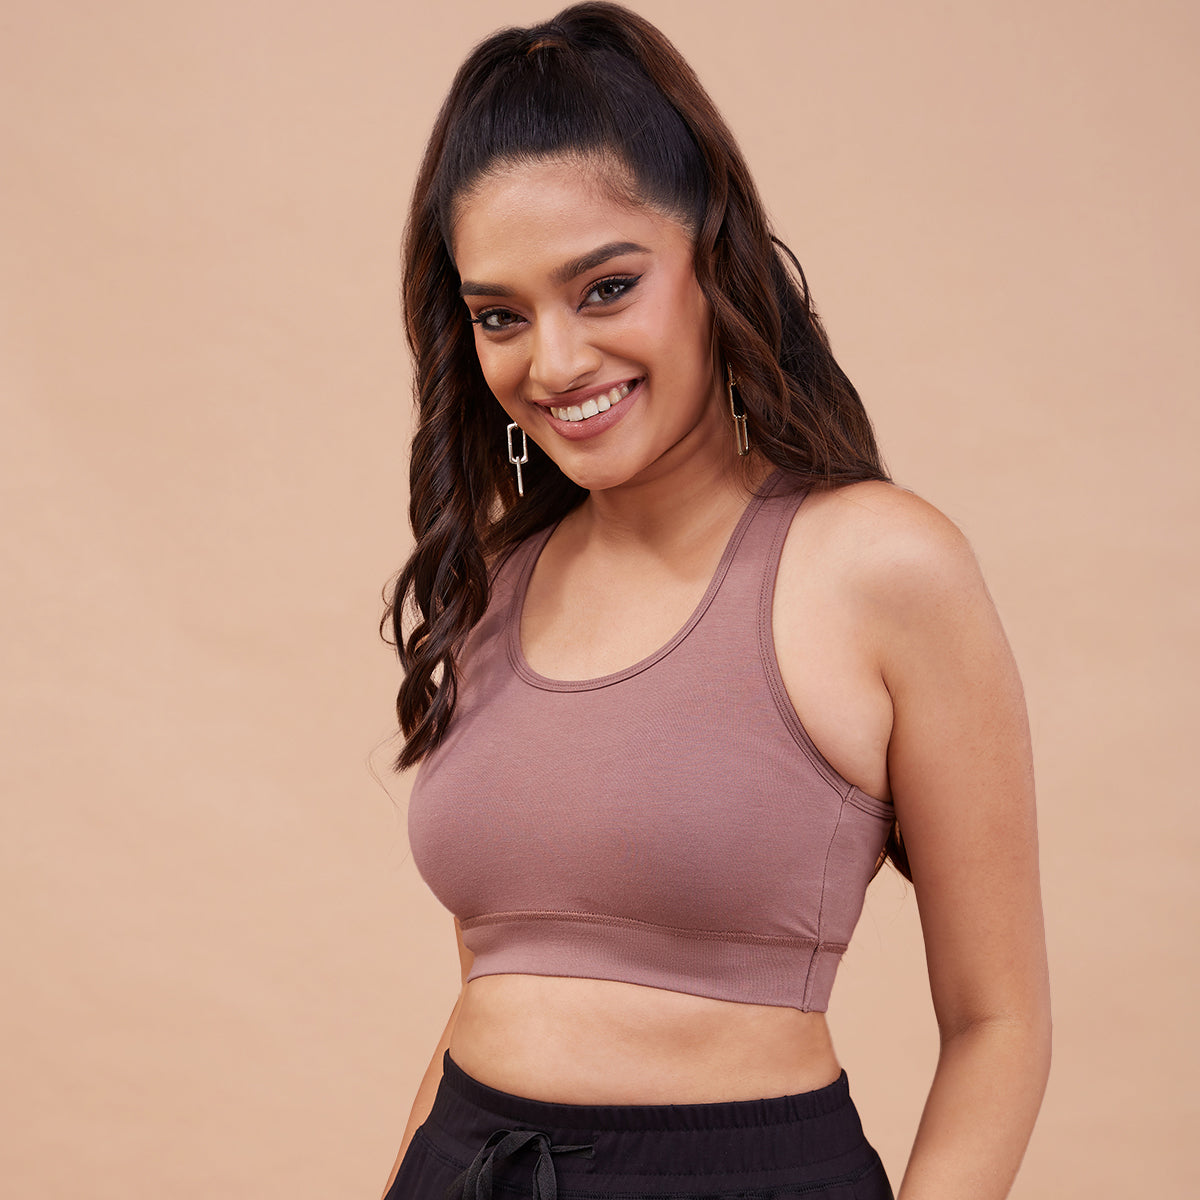 Nykd by Nykaa Essential Cotton Sports Bra , Nykd All Day-NYK 059 - Green